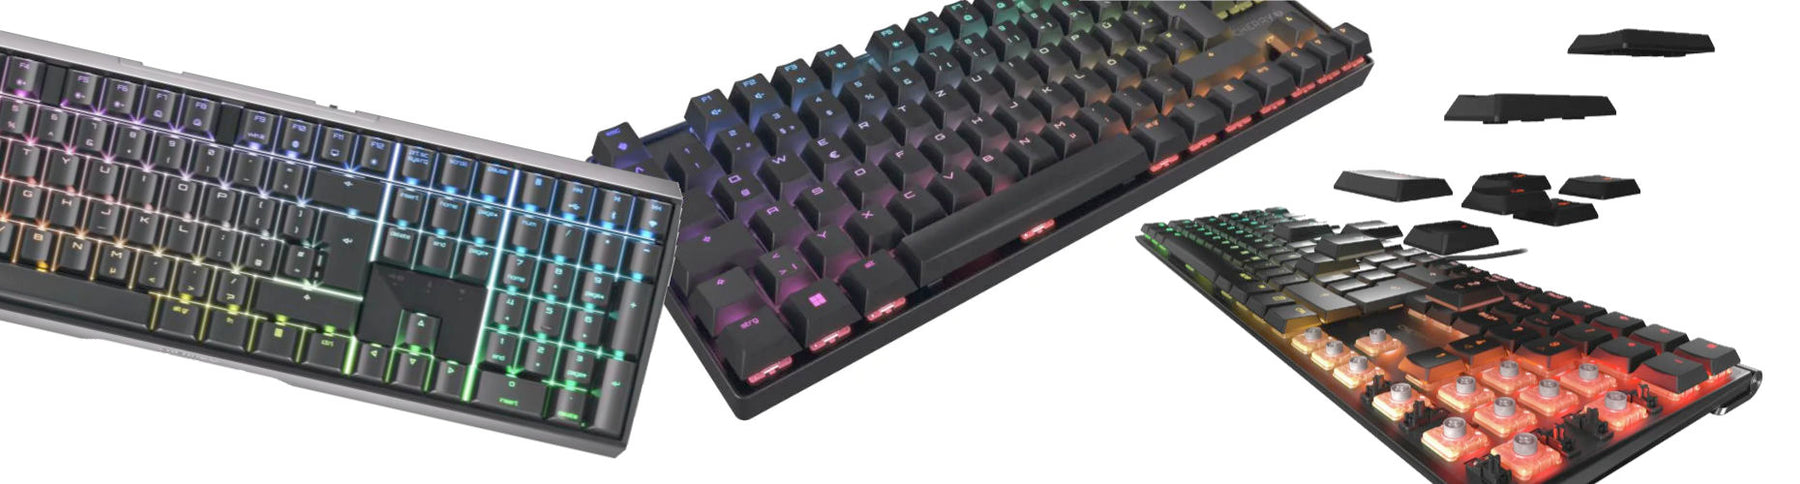 5 of the Best Cherry Gaming Keyboards